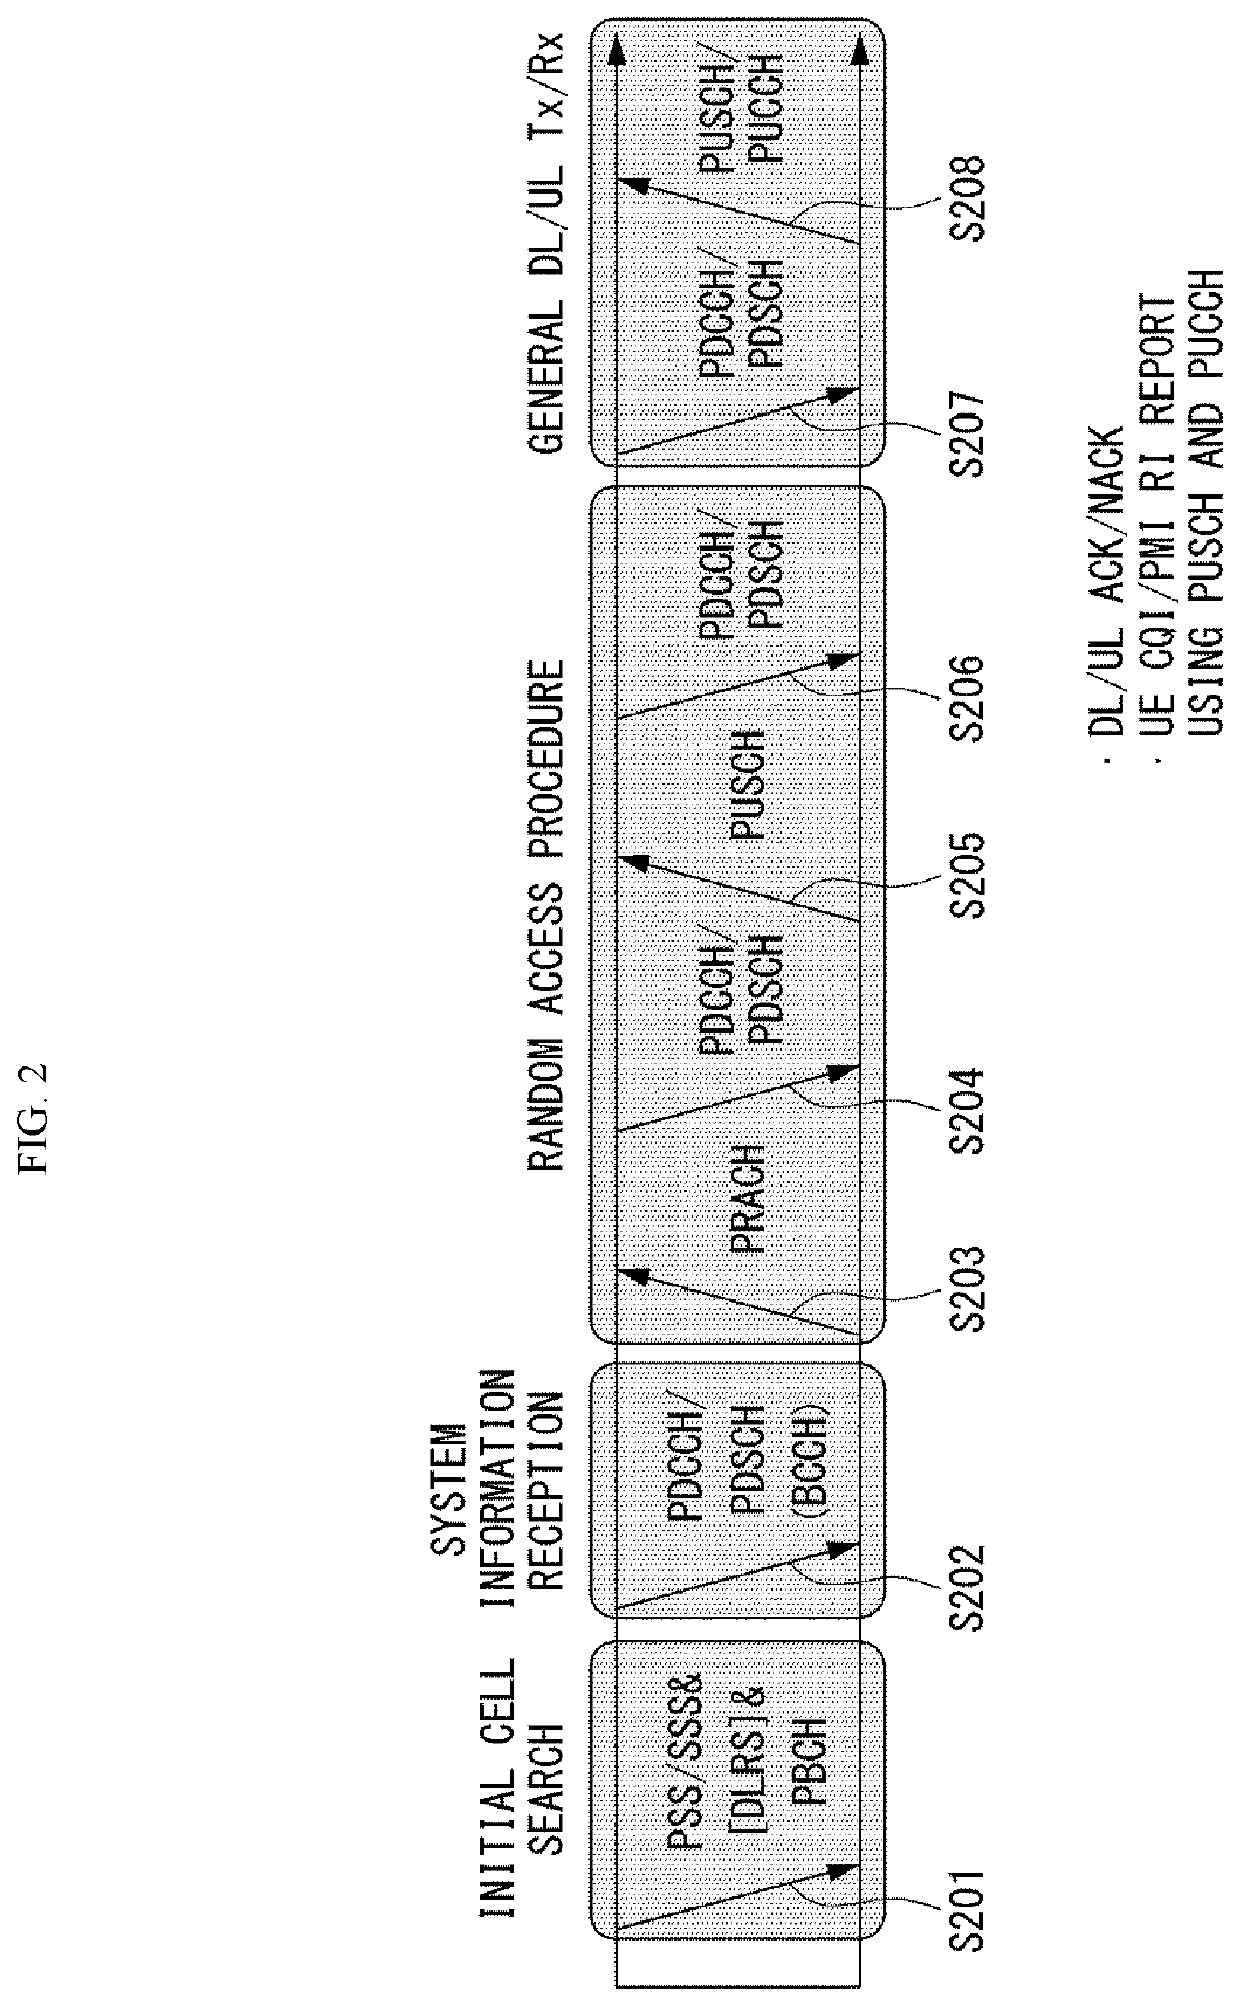 Method and apparatus for responding to hacking on autonomous vehicle